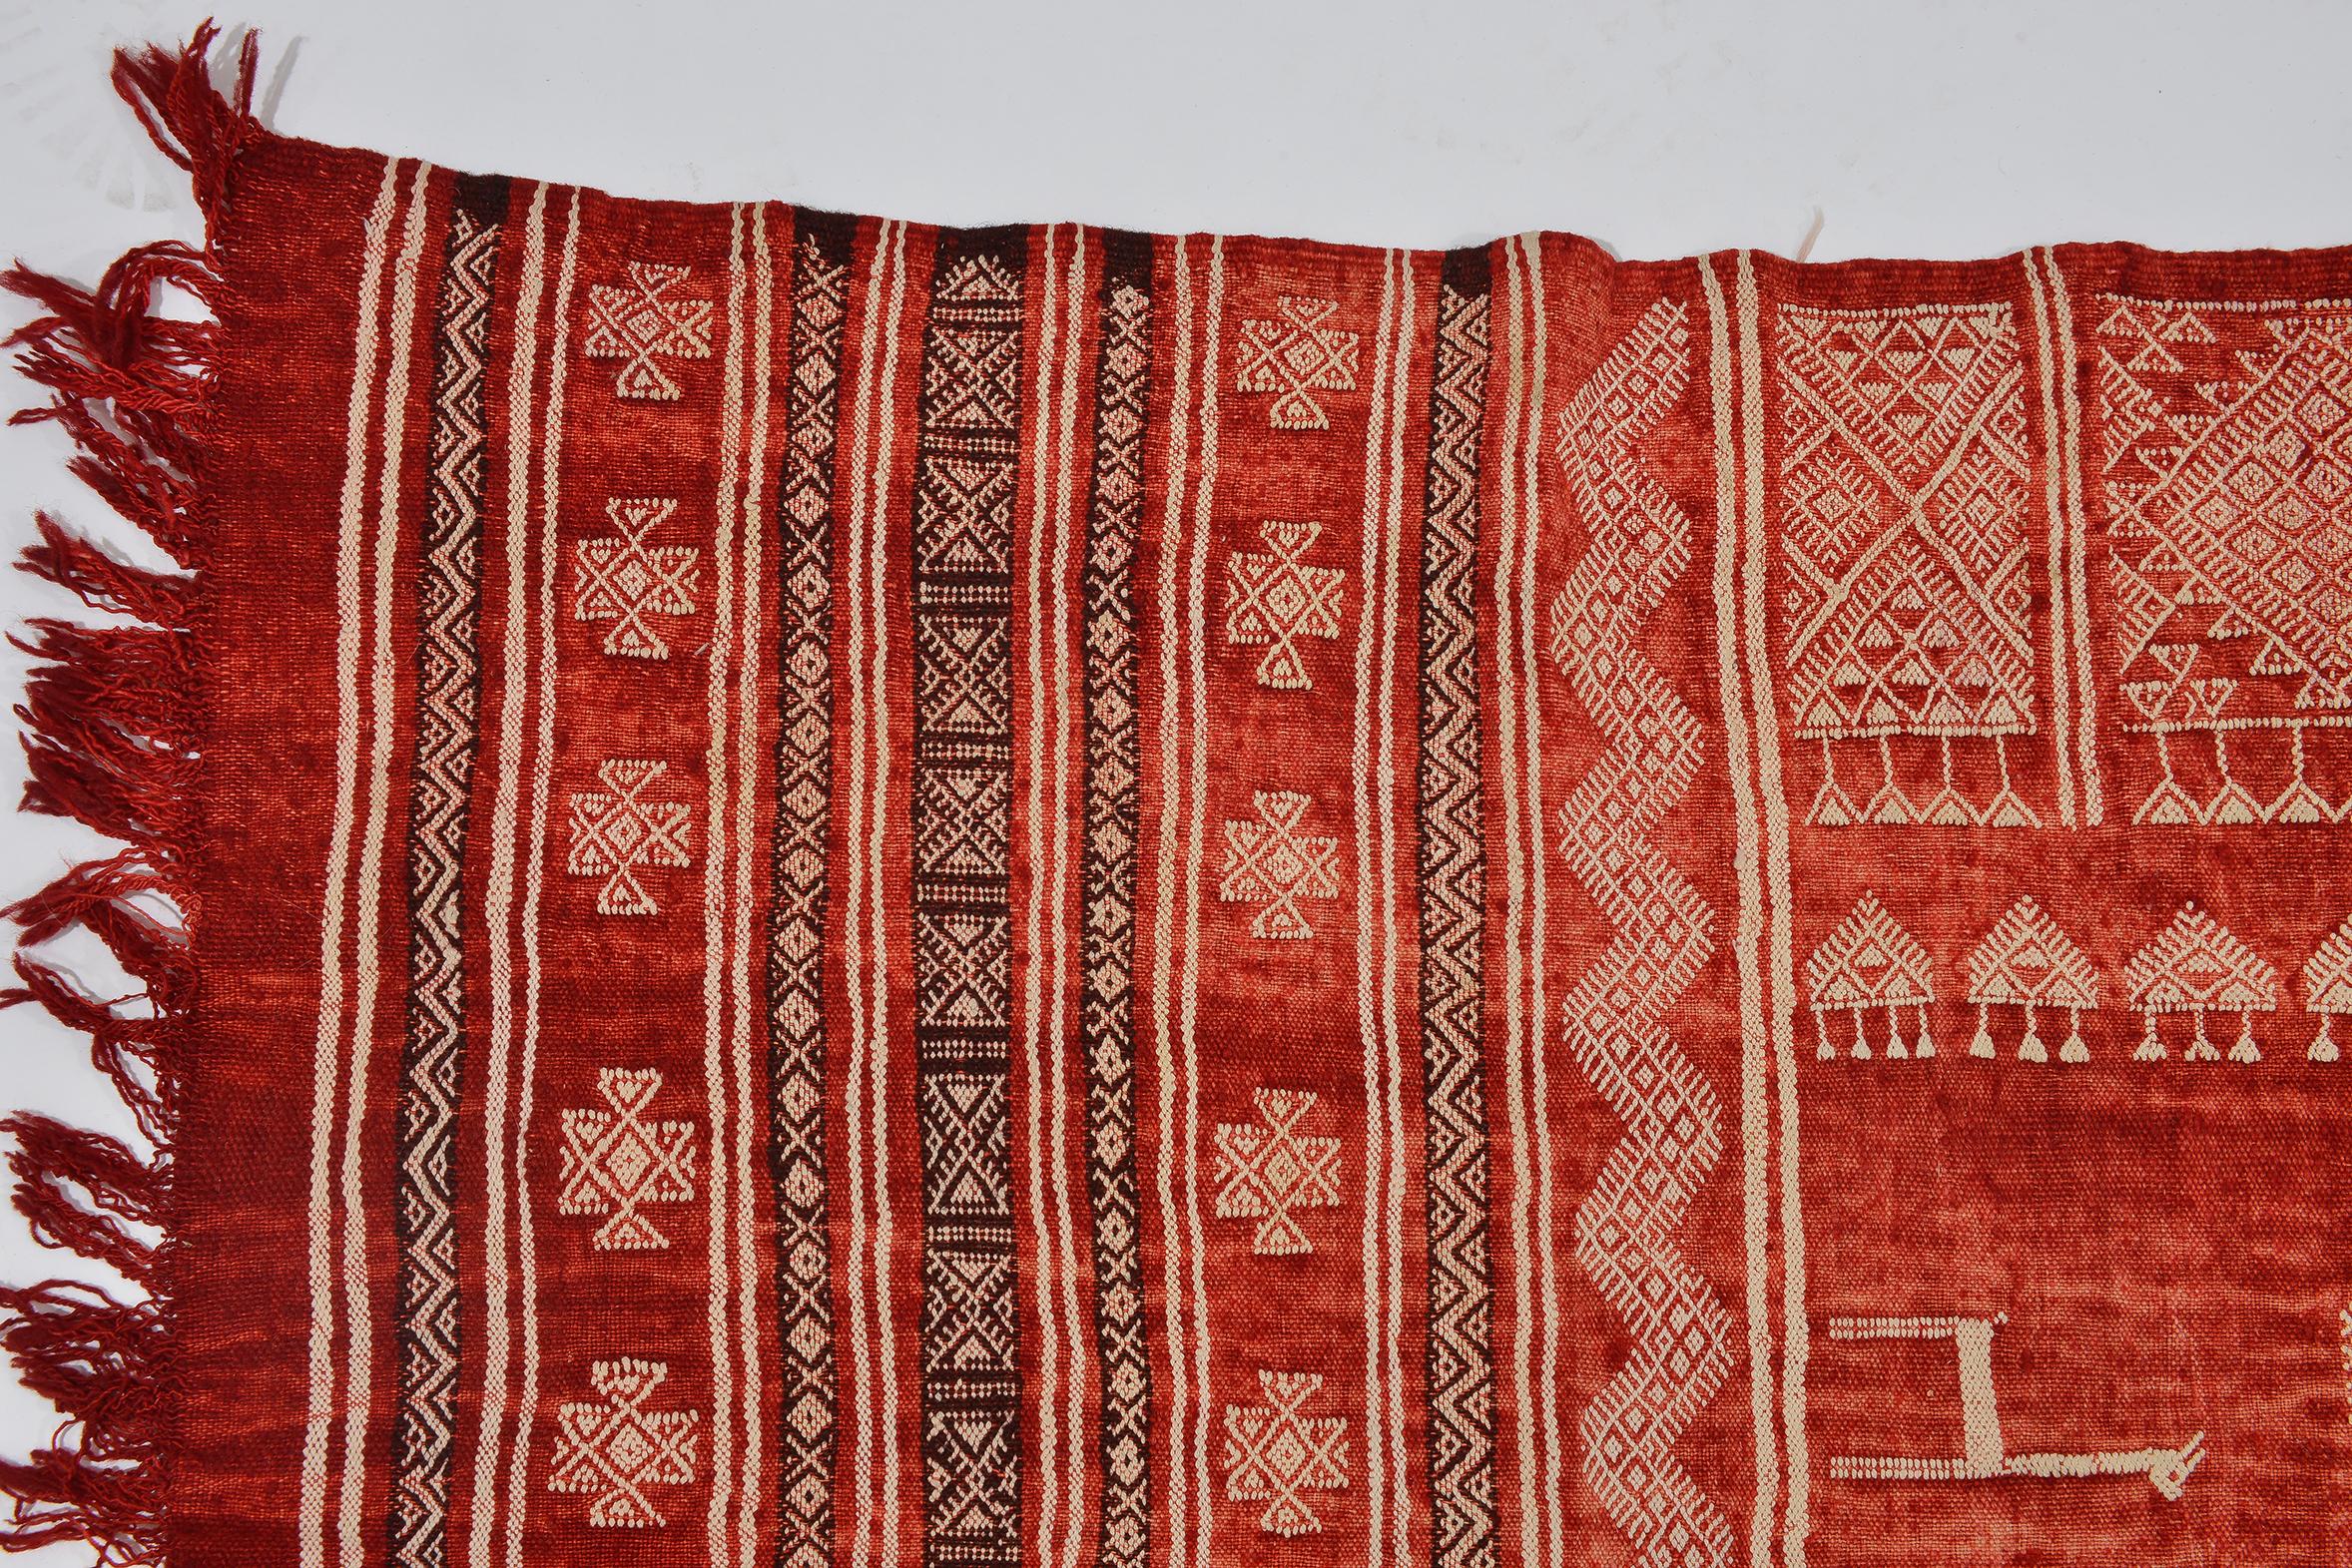 Rare Tunisian Ouedzem Embroidered Tissue or Carpet For Sale 5